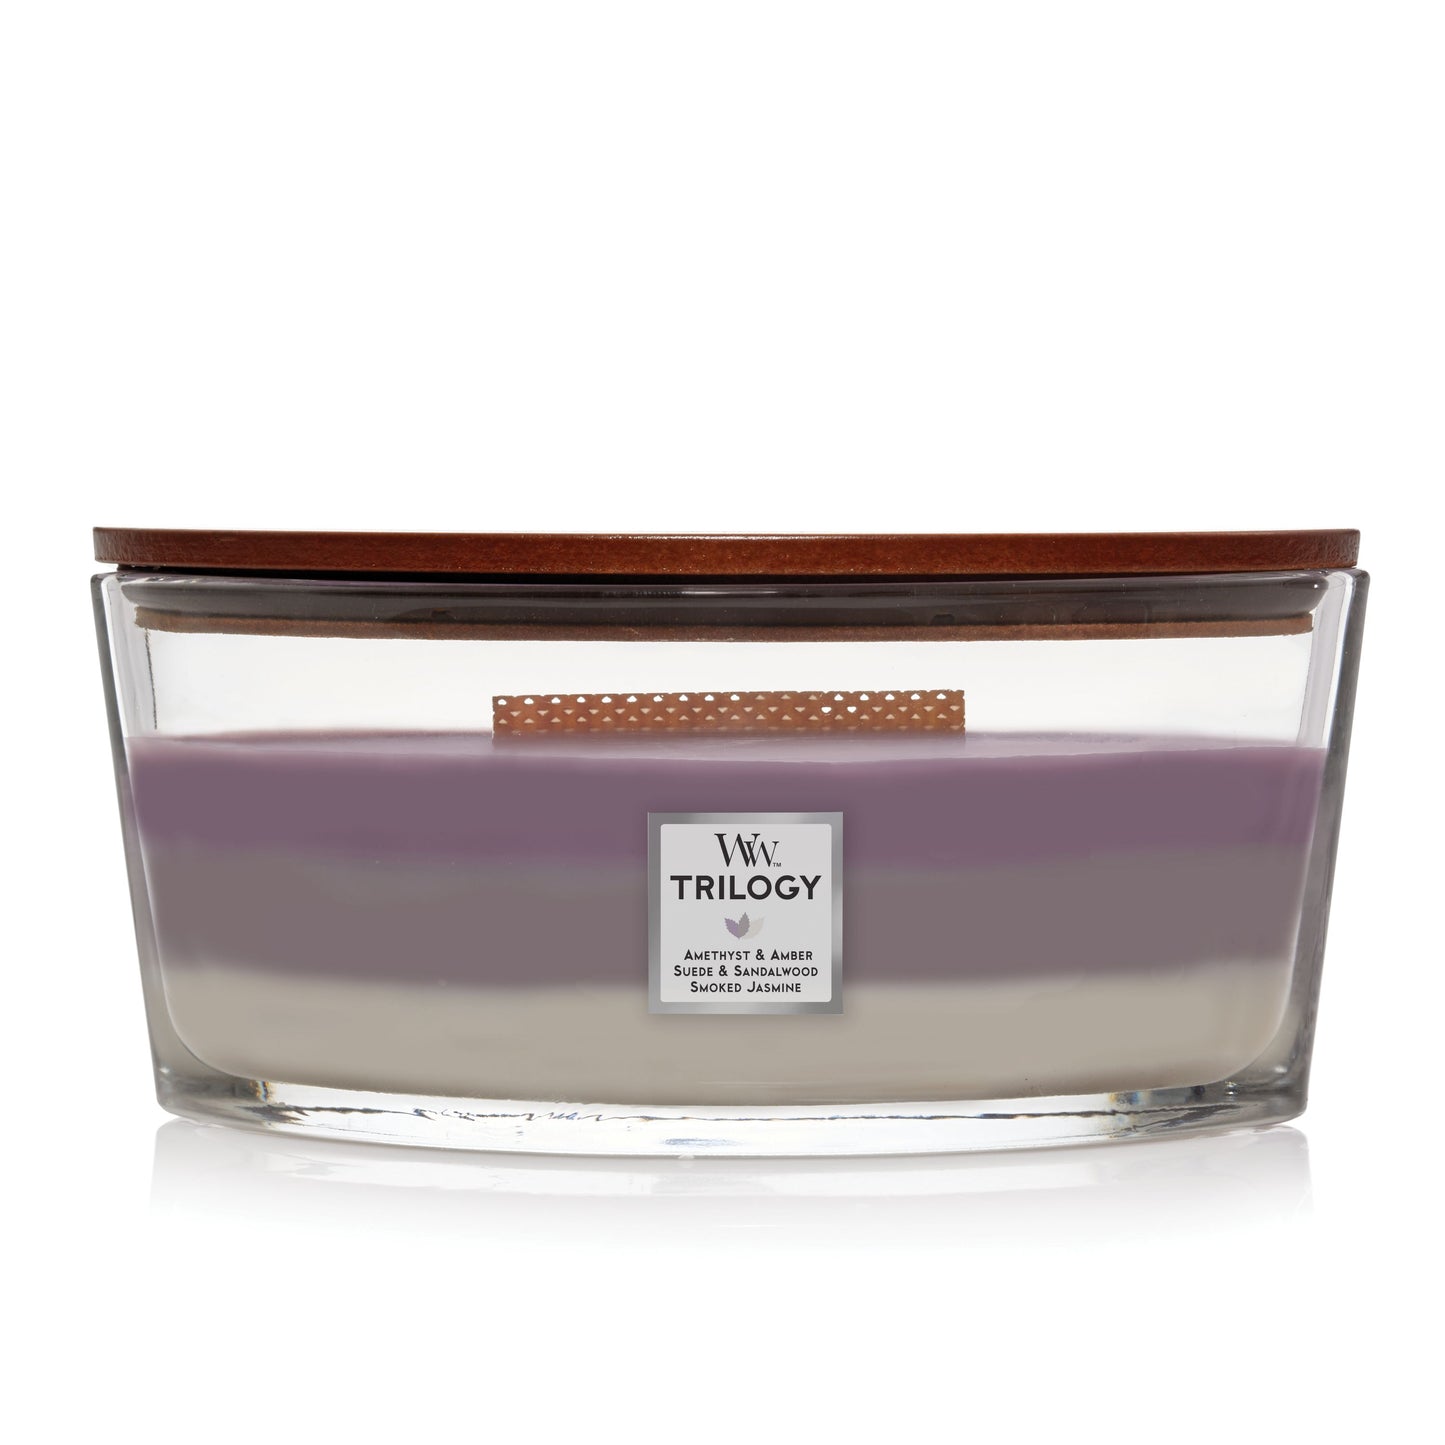 AMETHYST SKY TRILOGY - Ellipse HearthWick Flame Scented Candle by WoodWick - 3 in One